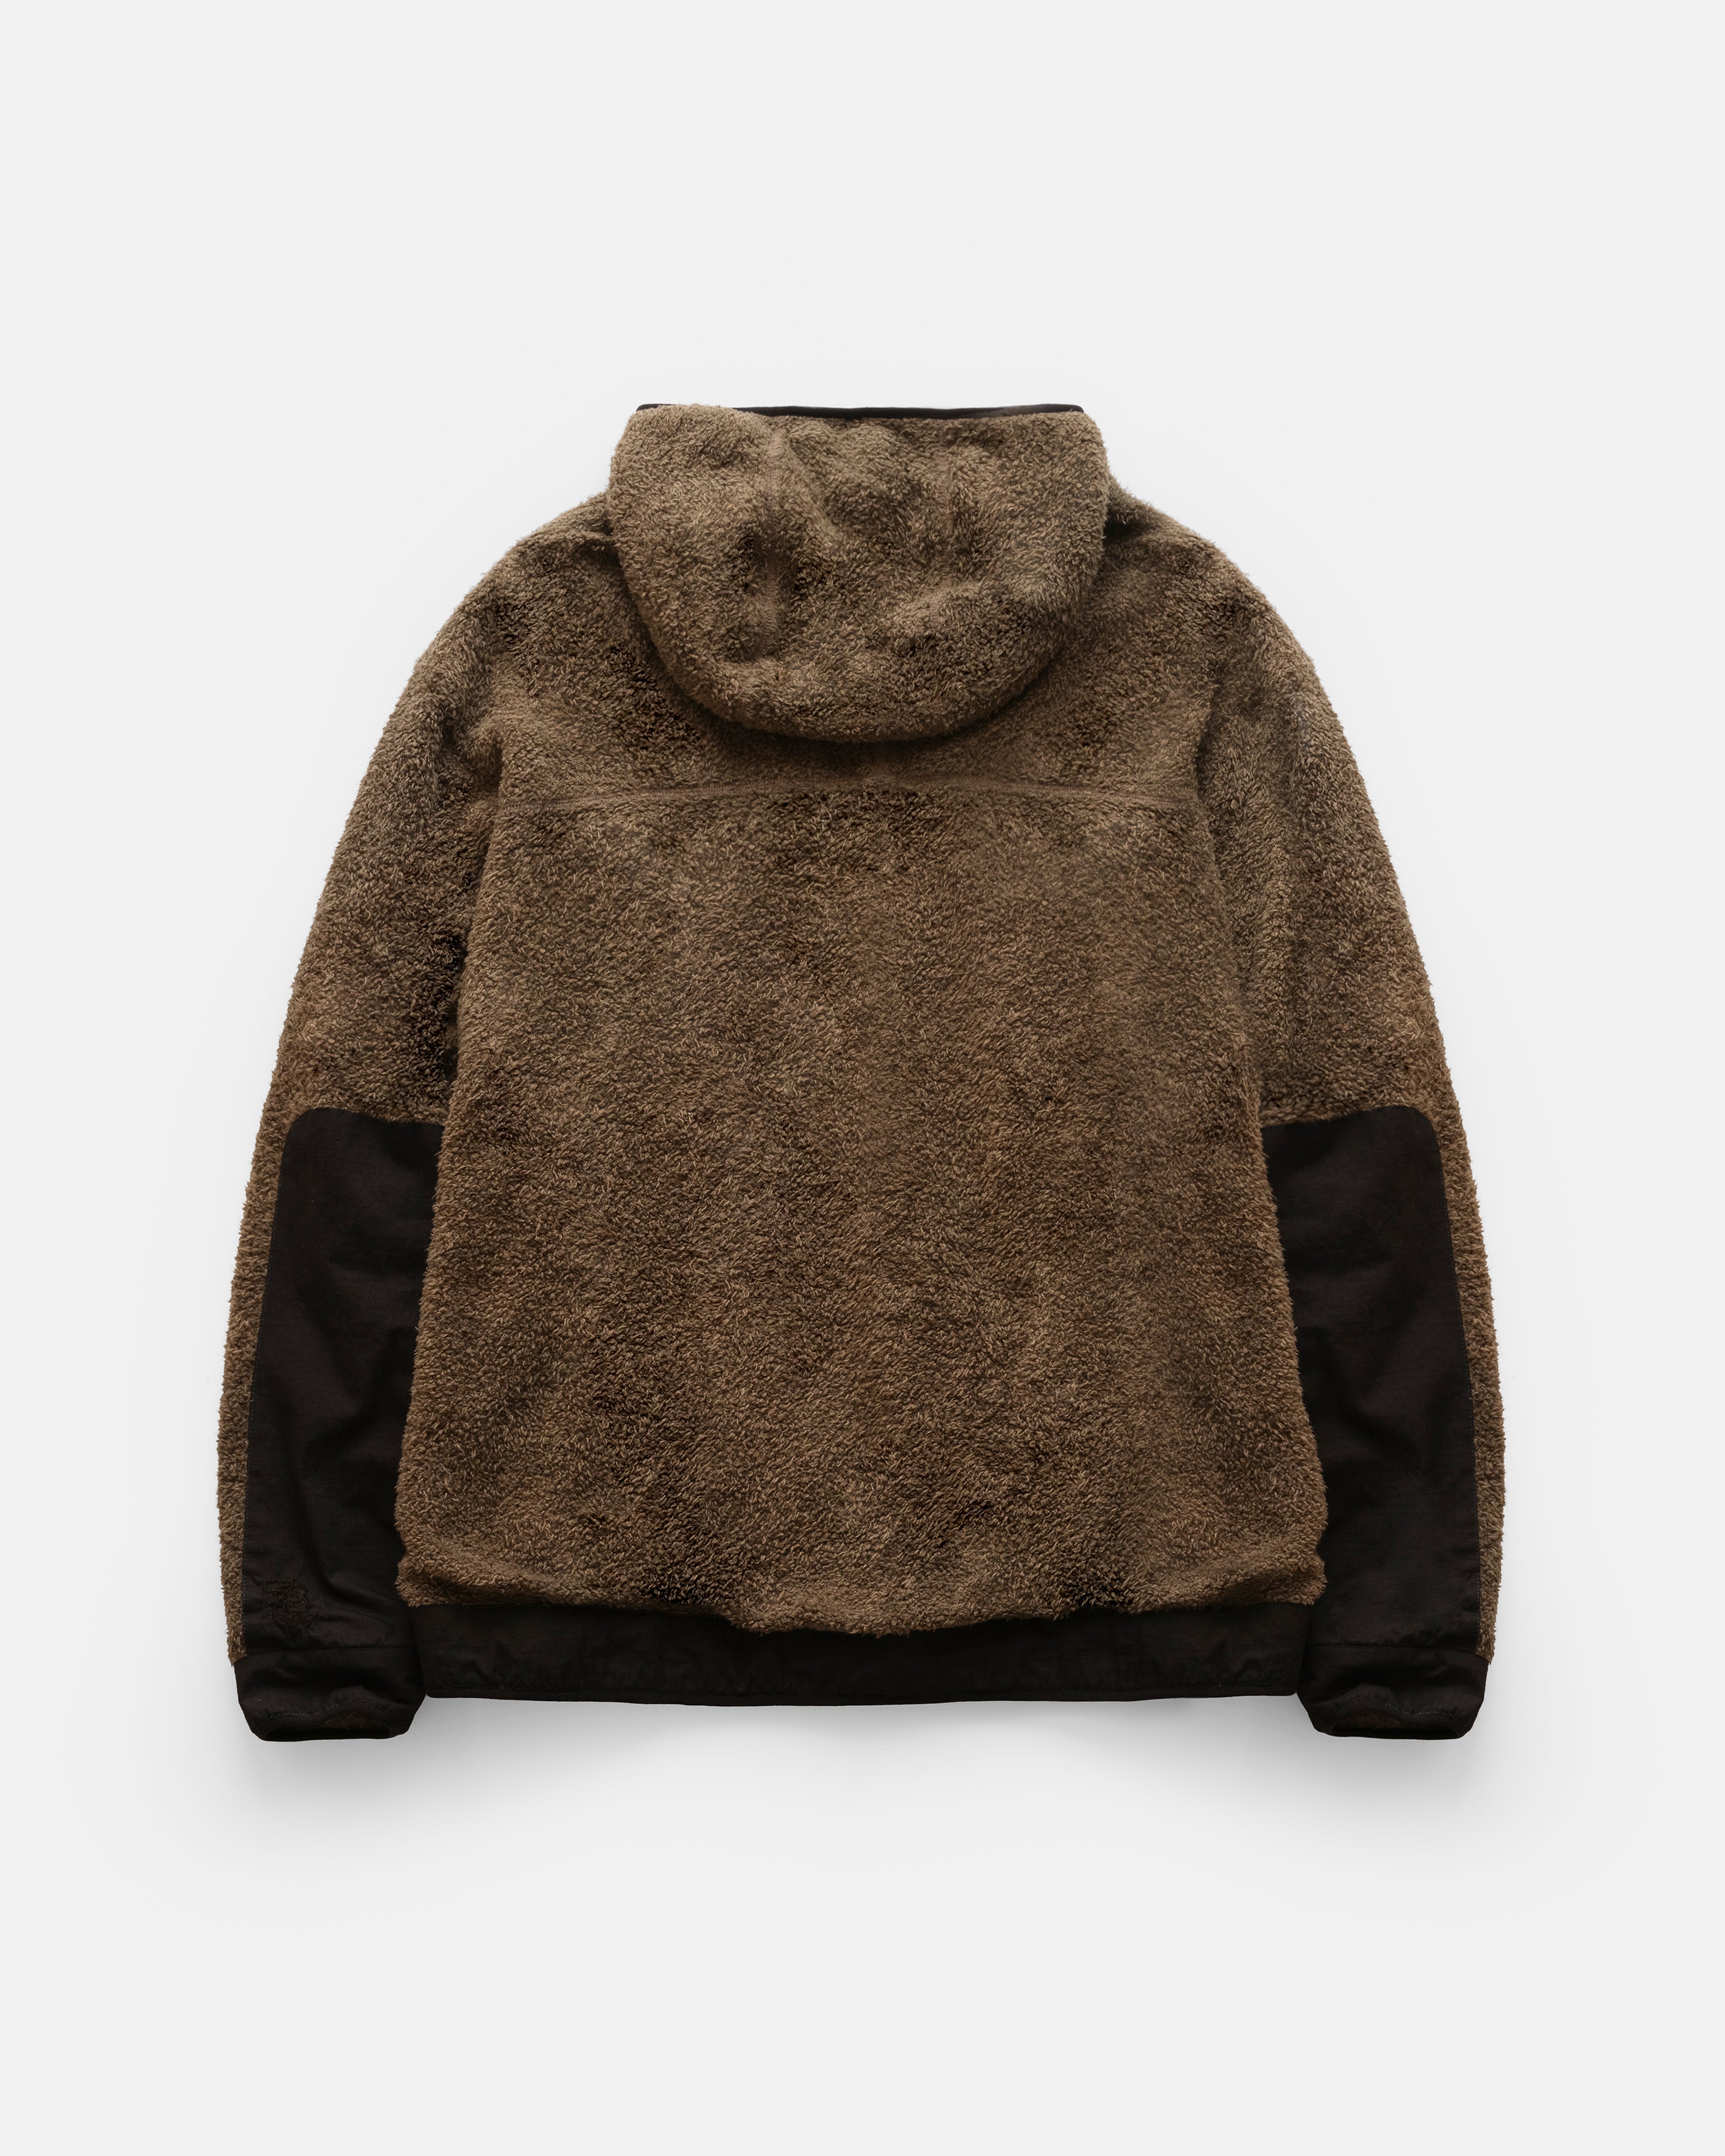 TEMPO LTE HOODED FLEECE - BROWN BLENDED WOOL BOUCLE / BLACK 60/40 RIPSTOP